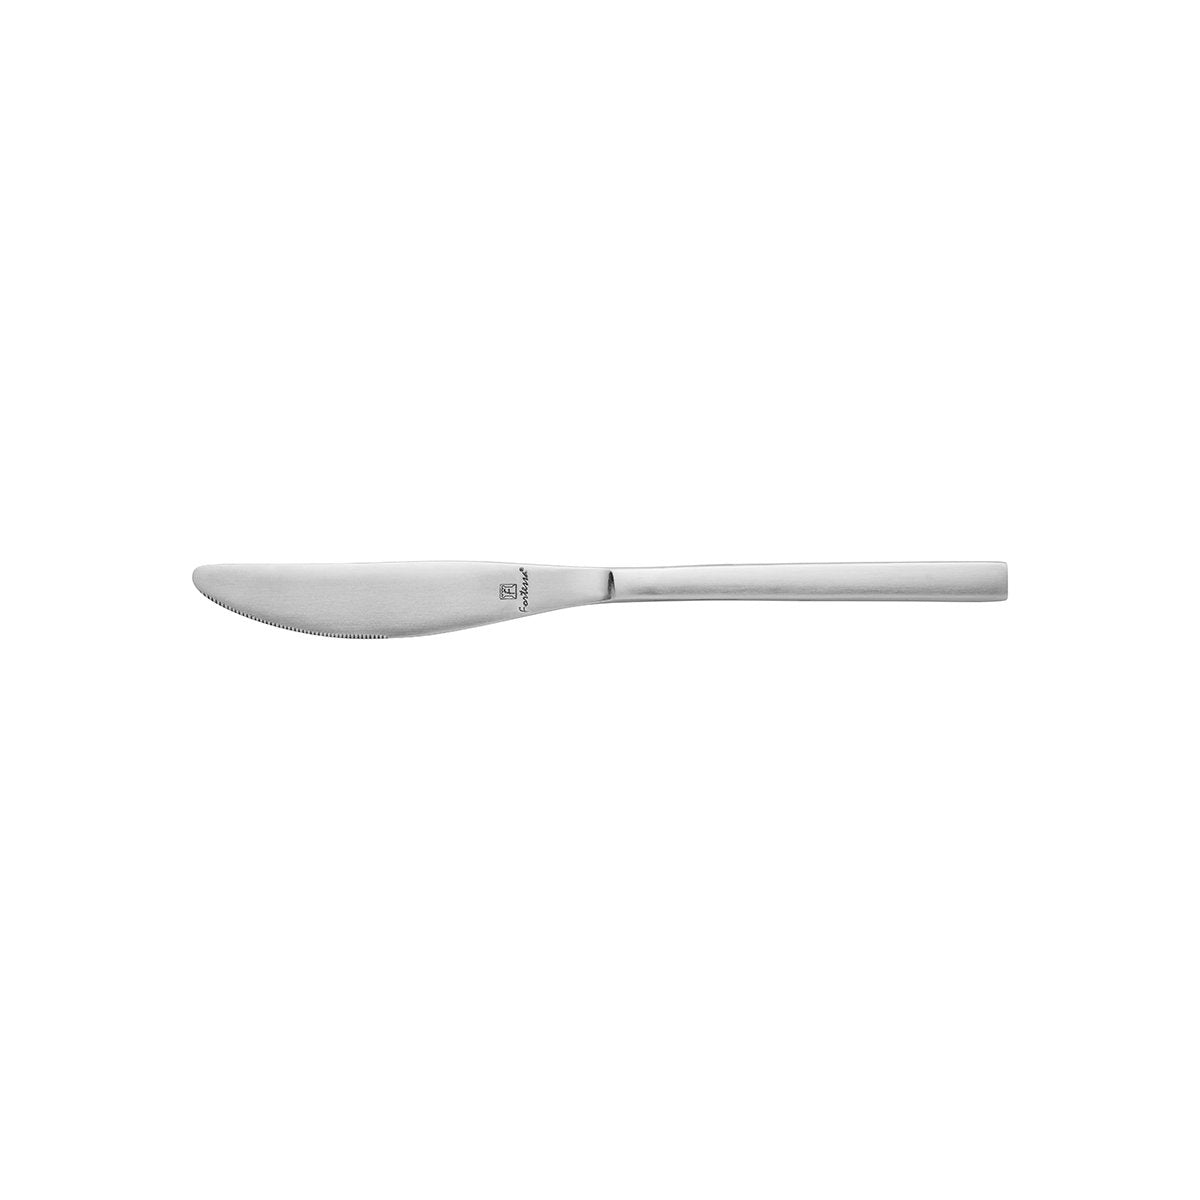 Dessert Knife - Titan Arezzo Brushed from Fortessa. made out of Stainless Steel and sold in boxes of 12. Hospitality quality at wholesale price with The Flying Fork! 